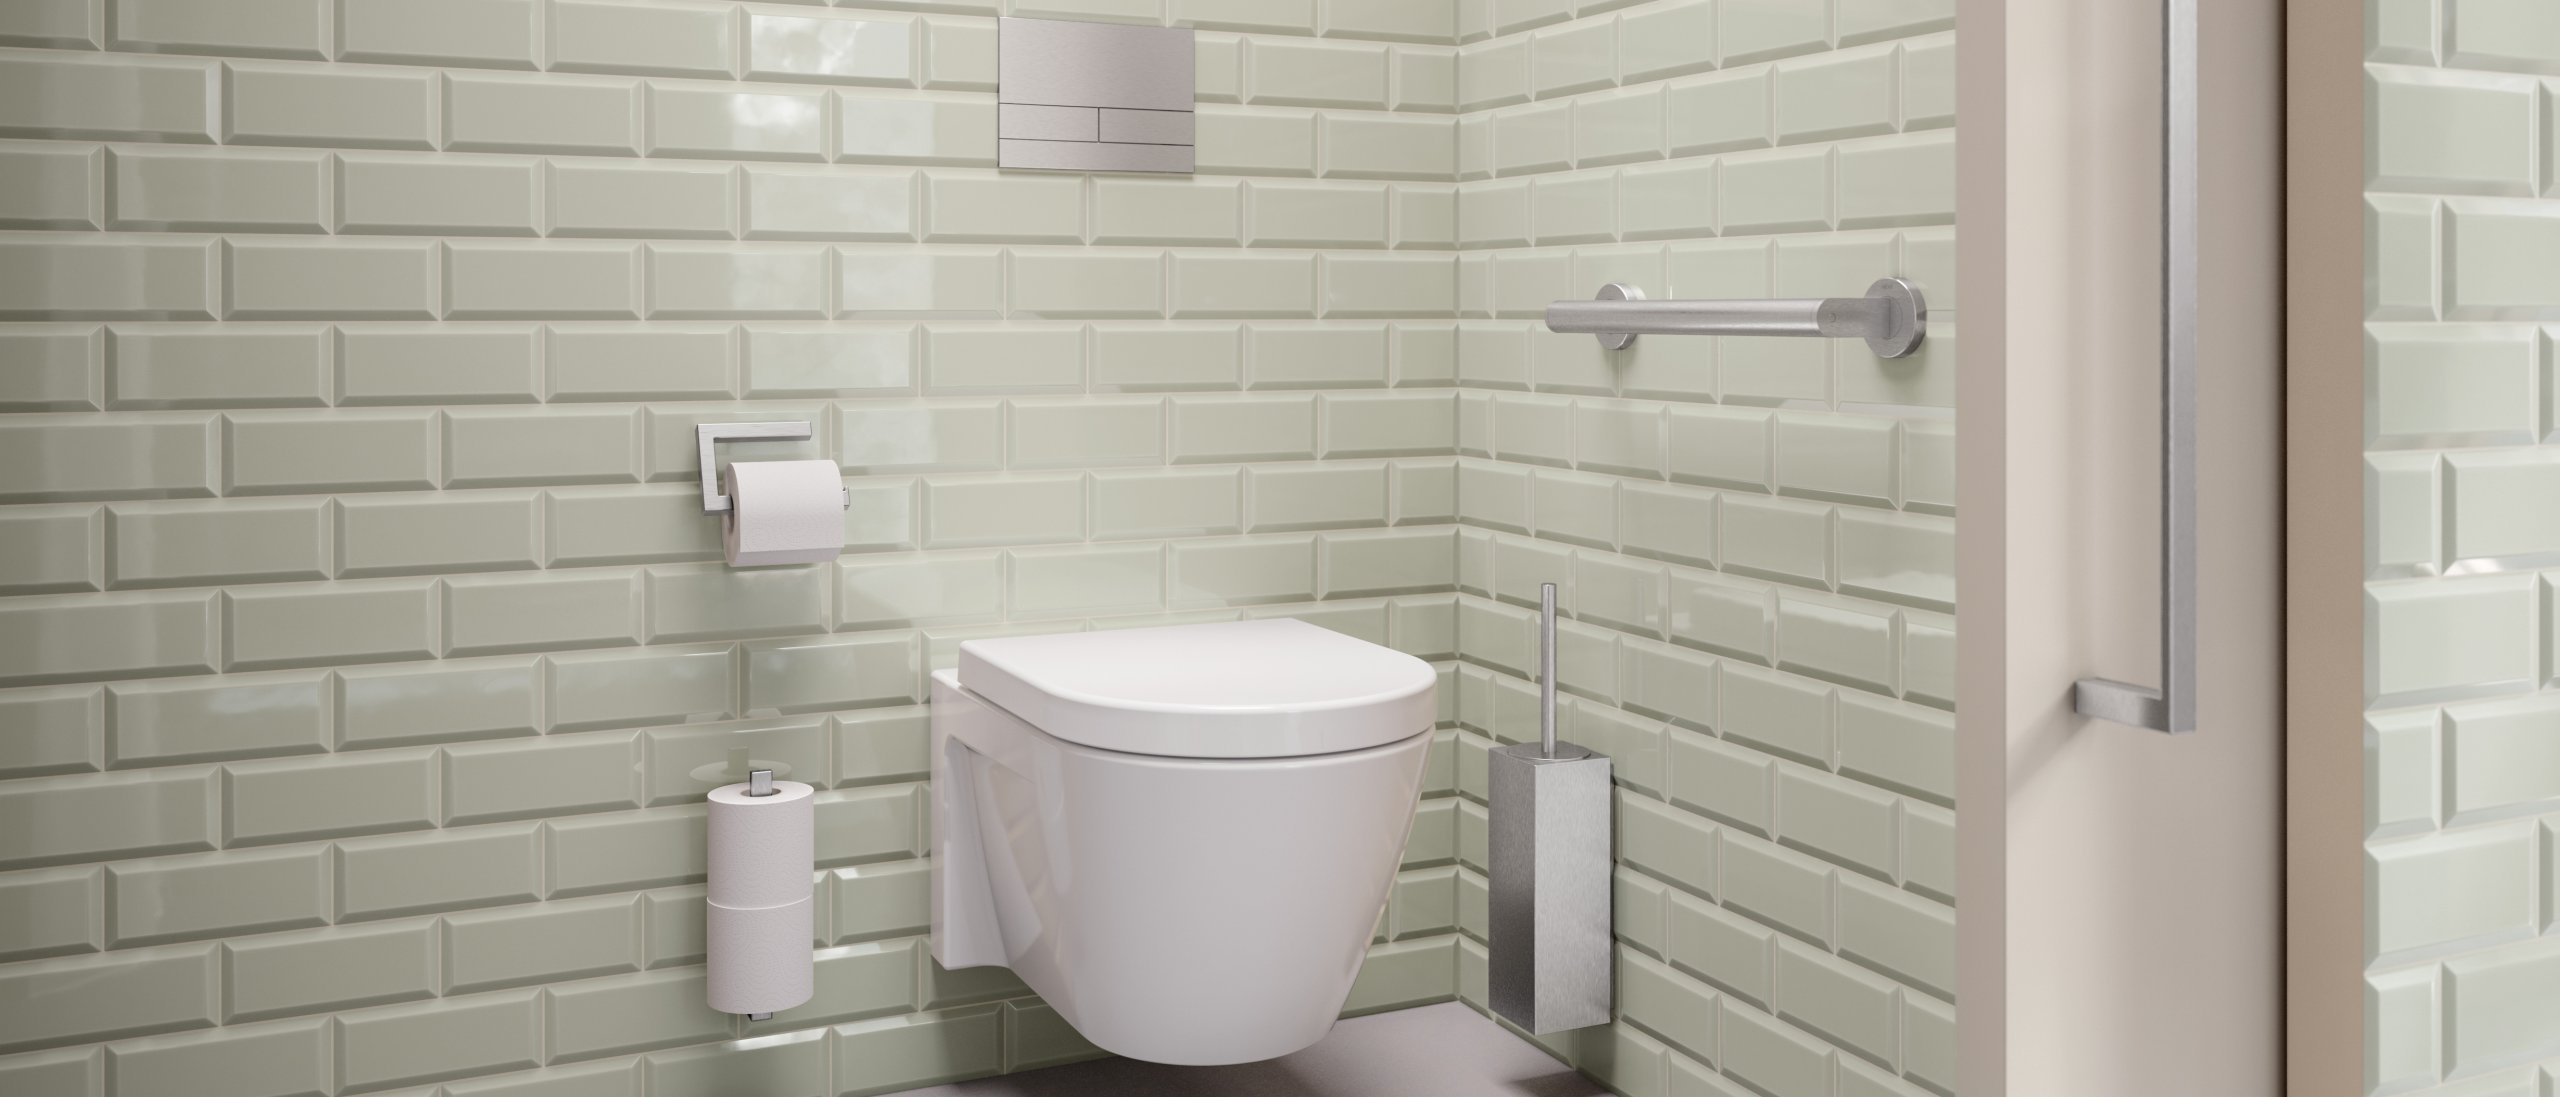 WC area equipped with toilet brush holder, toilet roll holder and grab rail in matt stainless steel